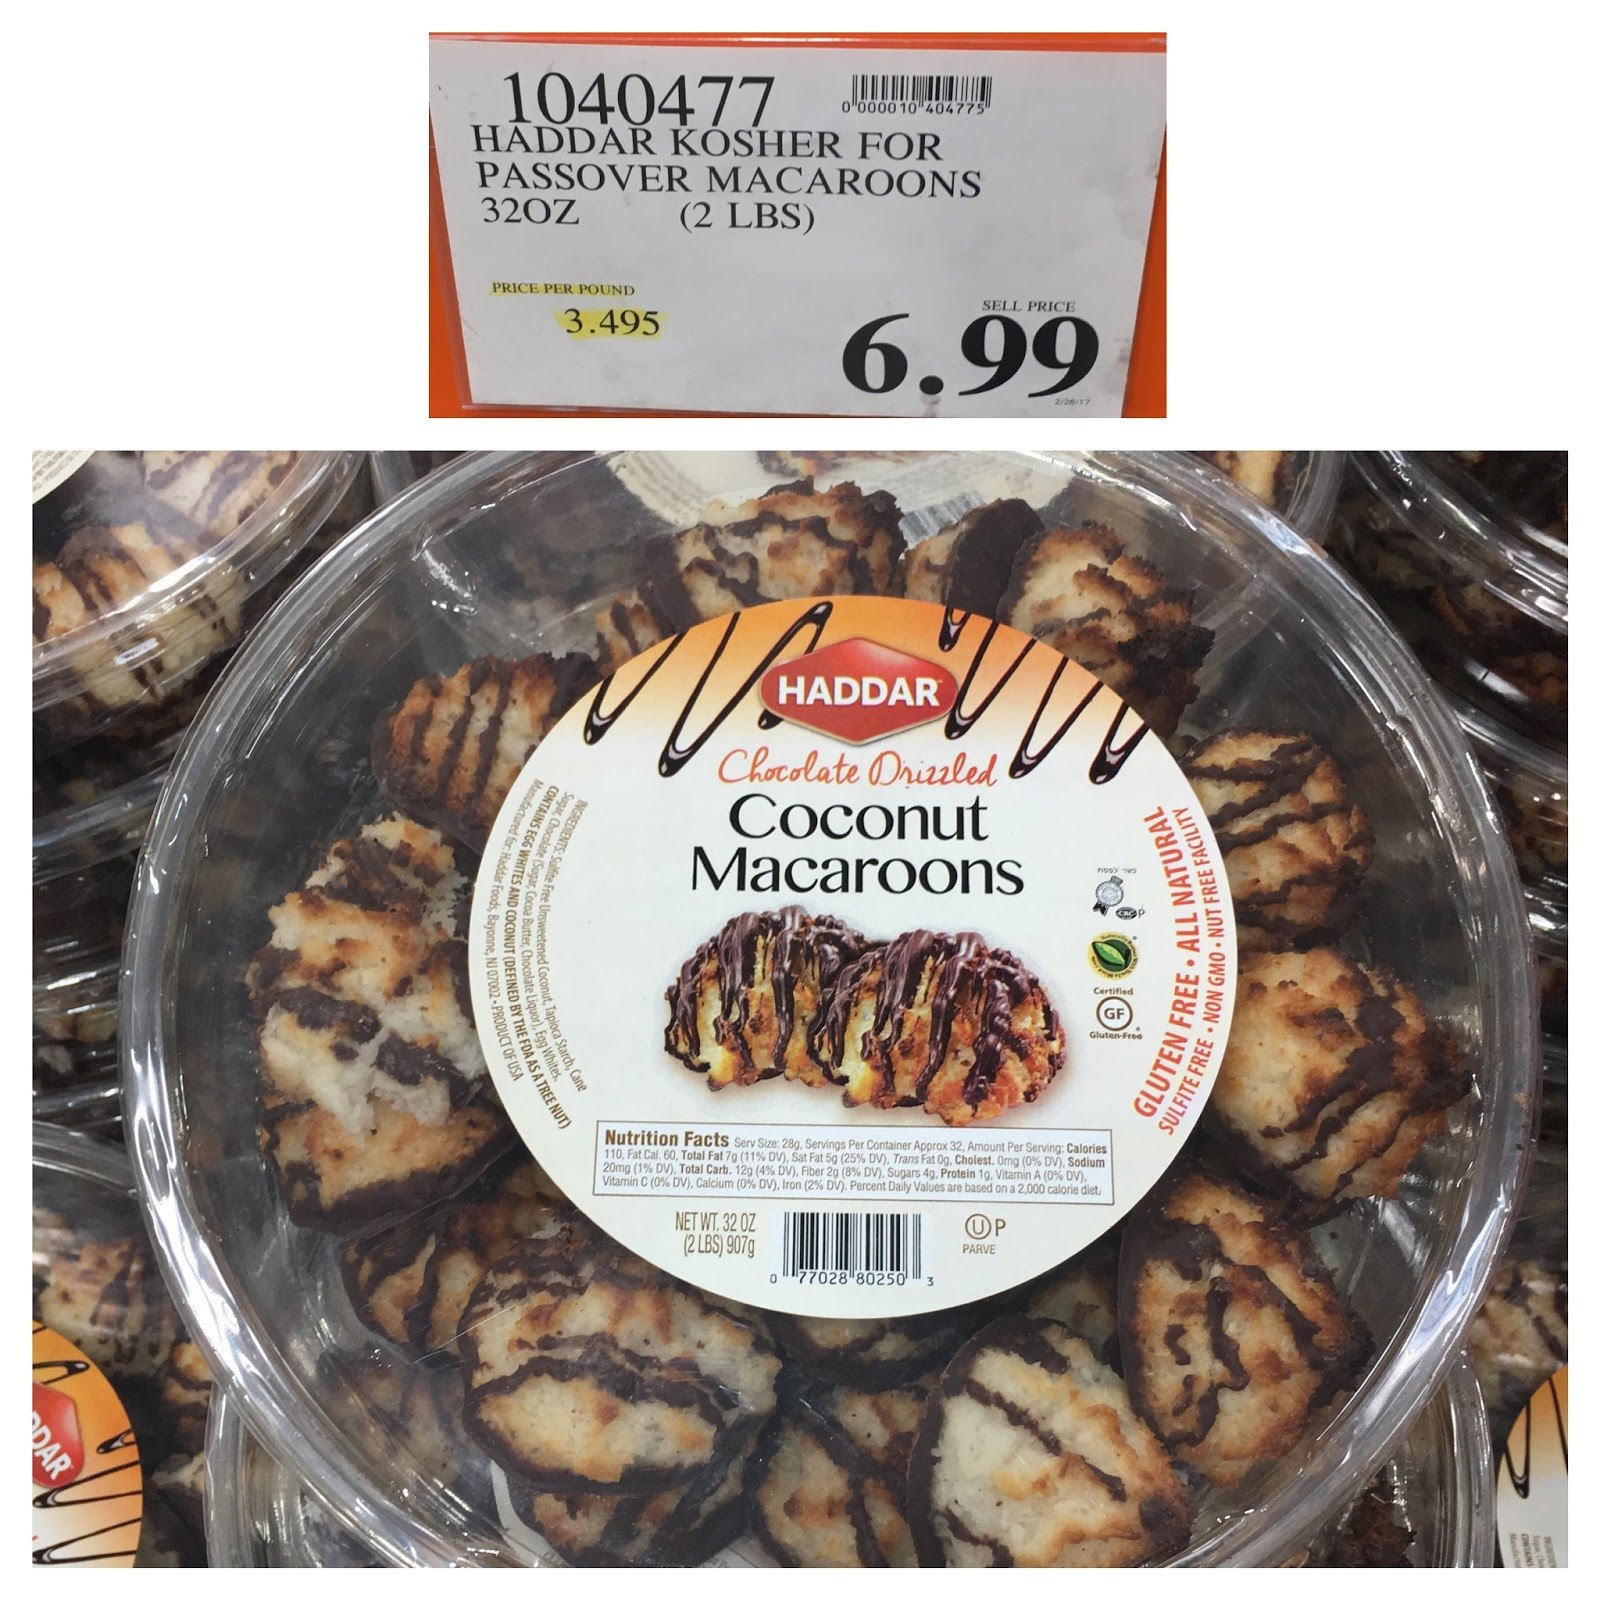 Kosher For Passover Macaroons
 the Costco Connoisseur Kosher and Kosher for Passover at